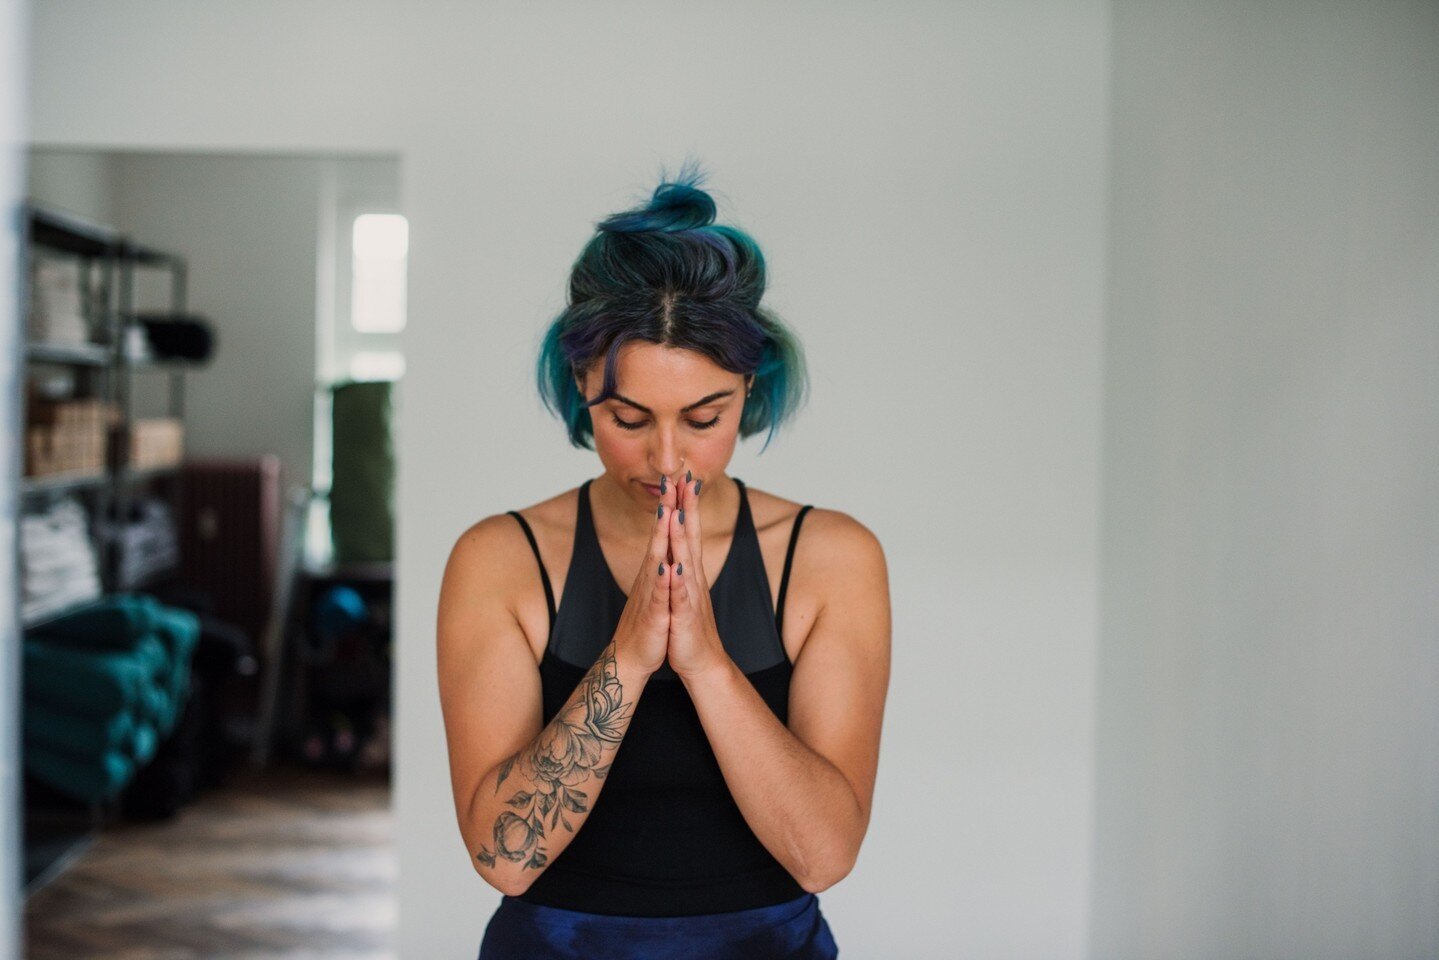 Only two weeks to go until Katy returns from her practice in Mysore! Get ready for an Ashtanga reboot at TVP, as from February onwards, we have some exciting changes coming 💫⁠
-⁠
🌟 An online Mysore program will be launched where you can practice My